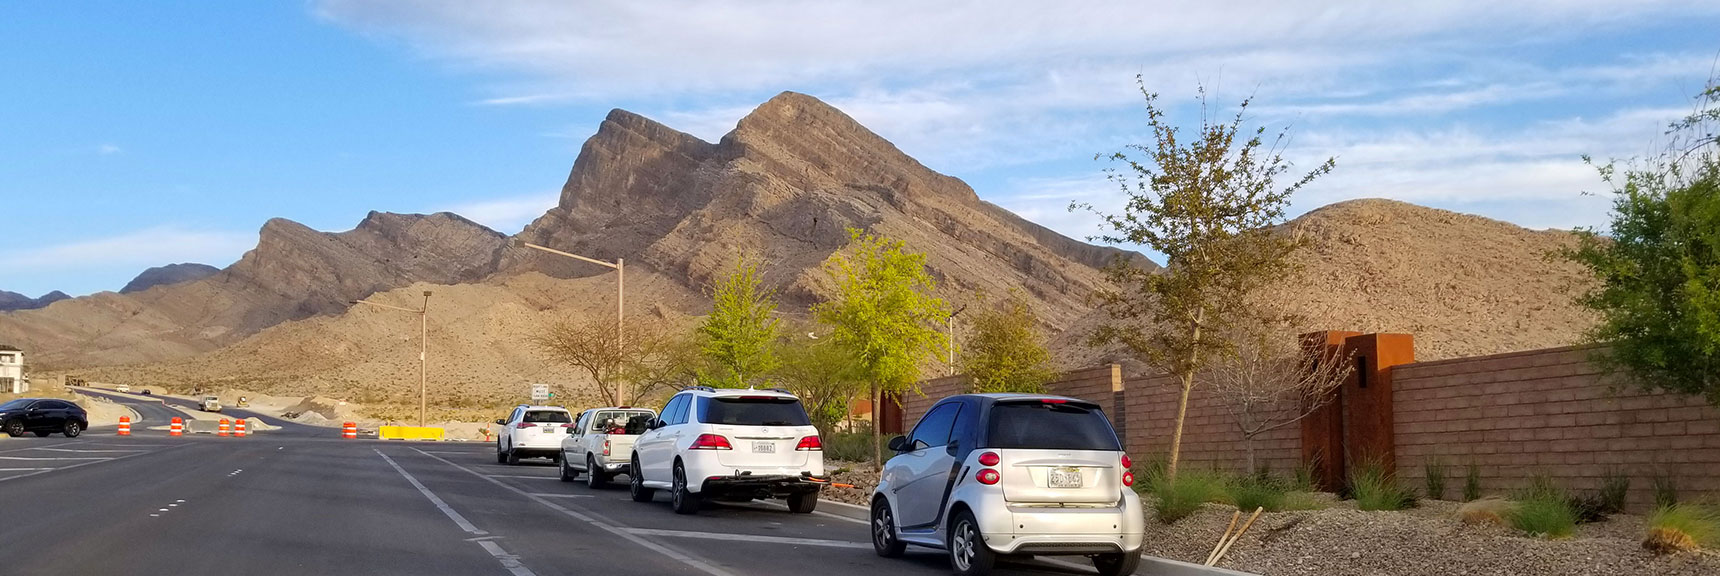 Parking Area at Upper End of Lake Mead Blvd Above Hwy 215 | Little Red Rock Las Vegas, Nevada, Near La Madre Mountains Wilderness